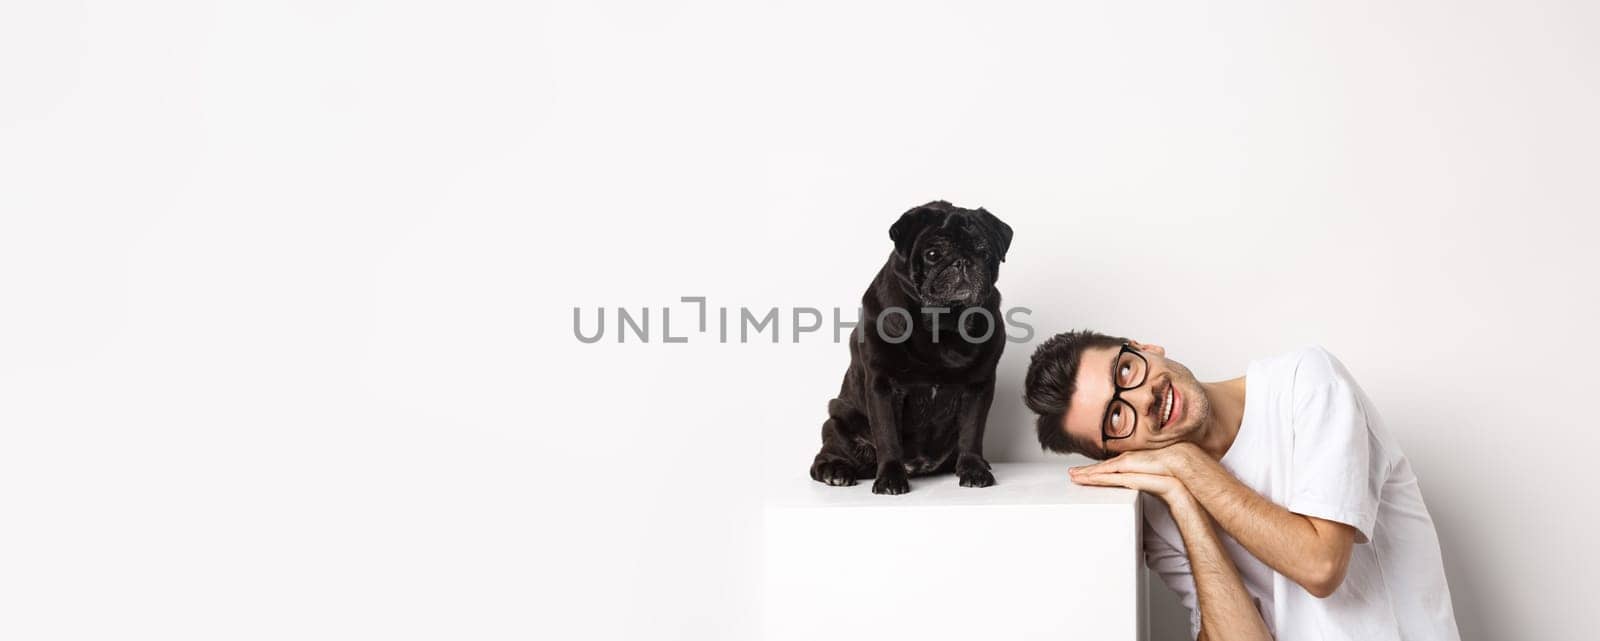 Handsome young man lay head near cute black pug, smiling and looking up at copy space, white background.